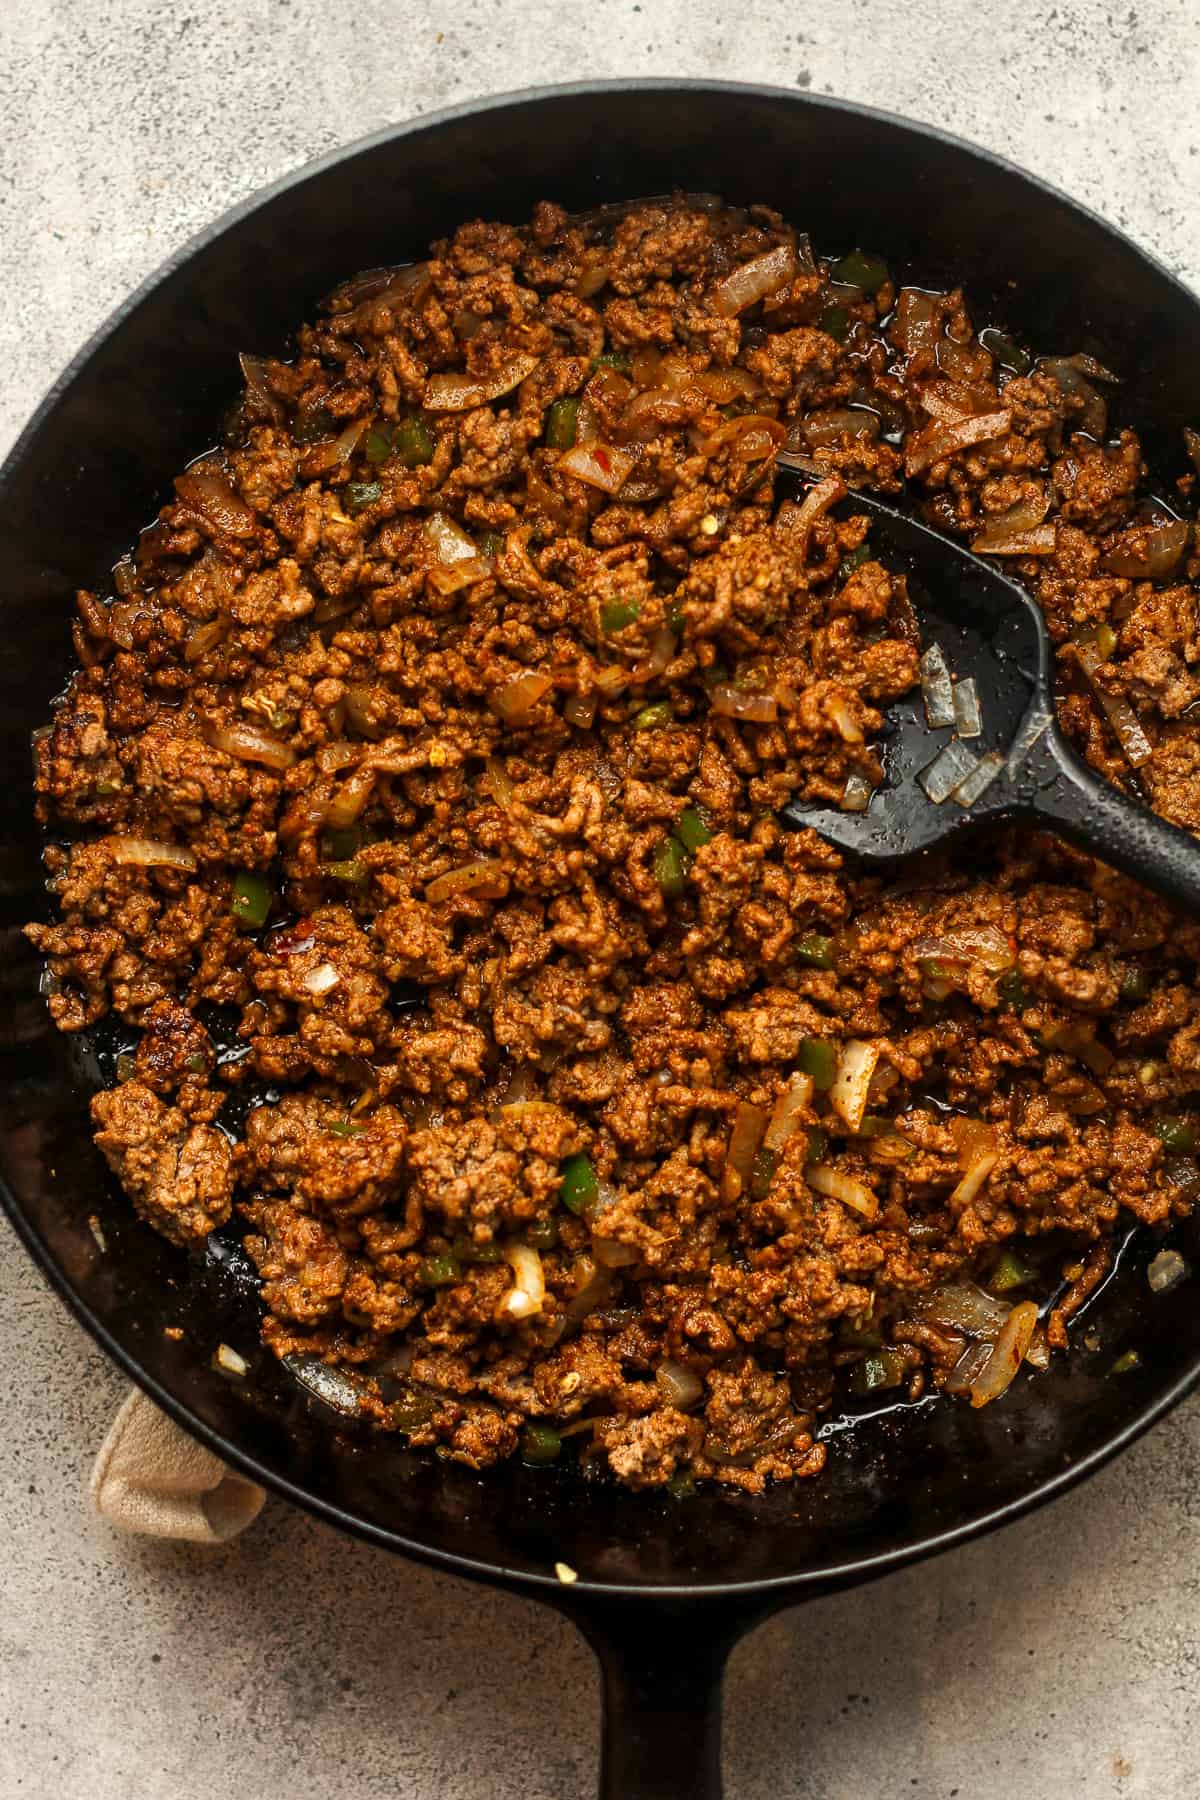 A skillet of the cooked taco meat.